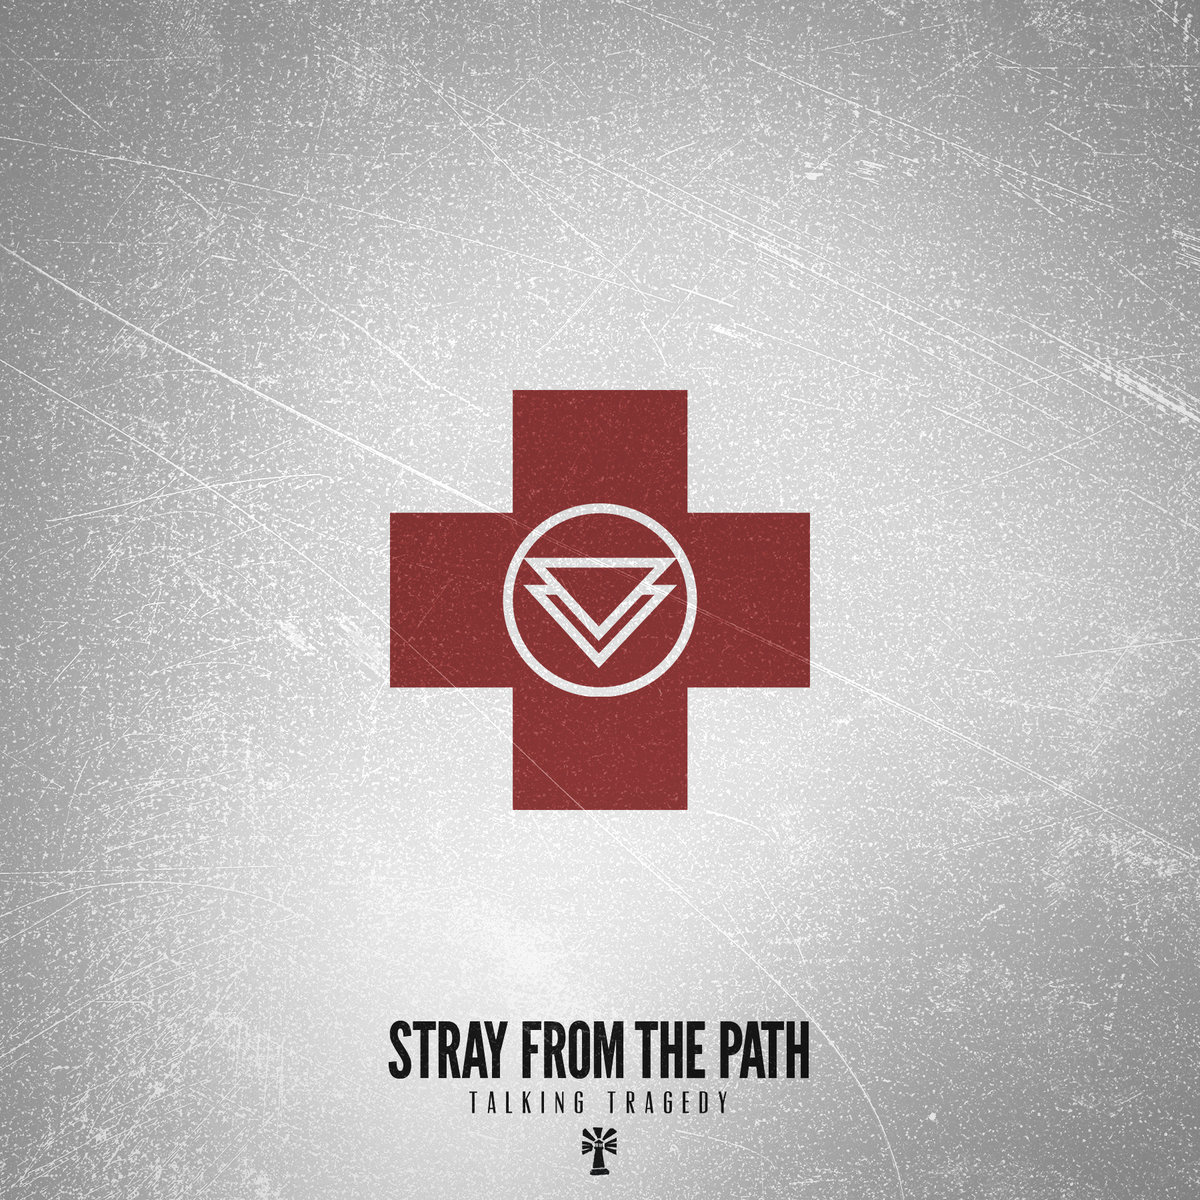 STRAY FROM THE PATH - Talking Tragedy cover 